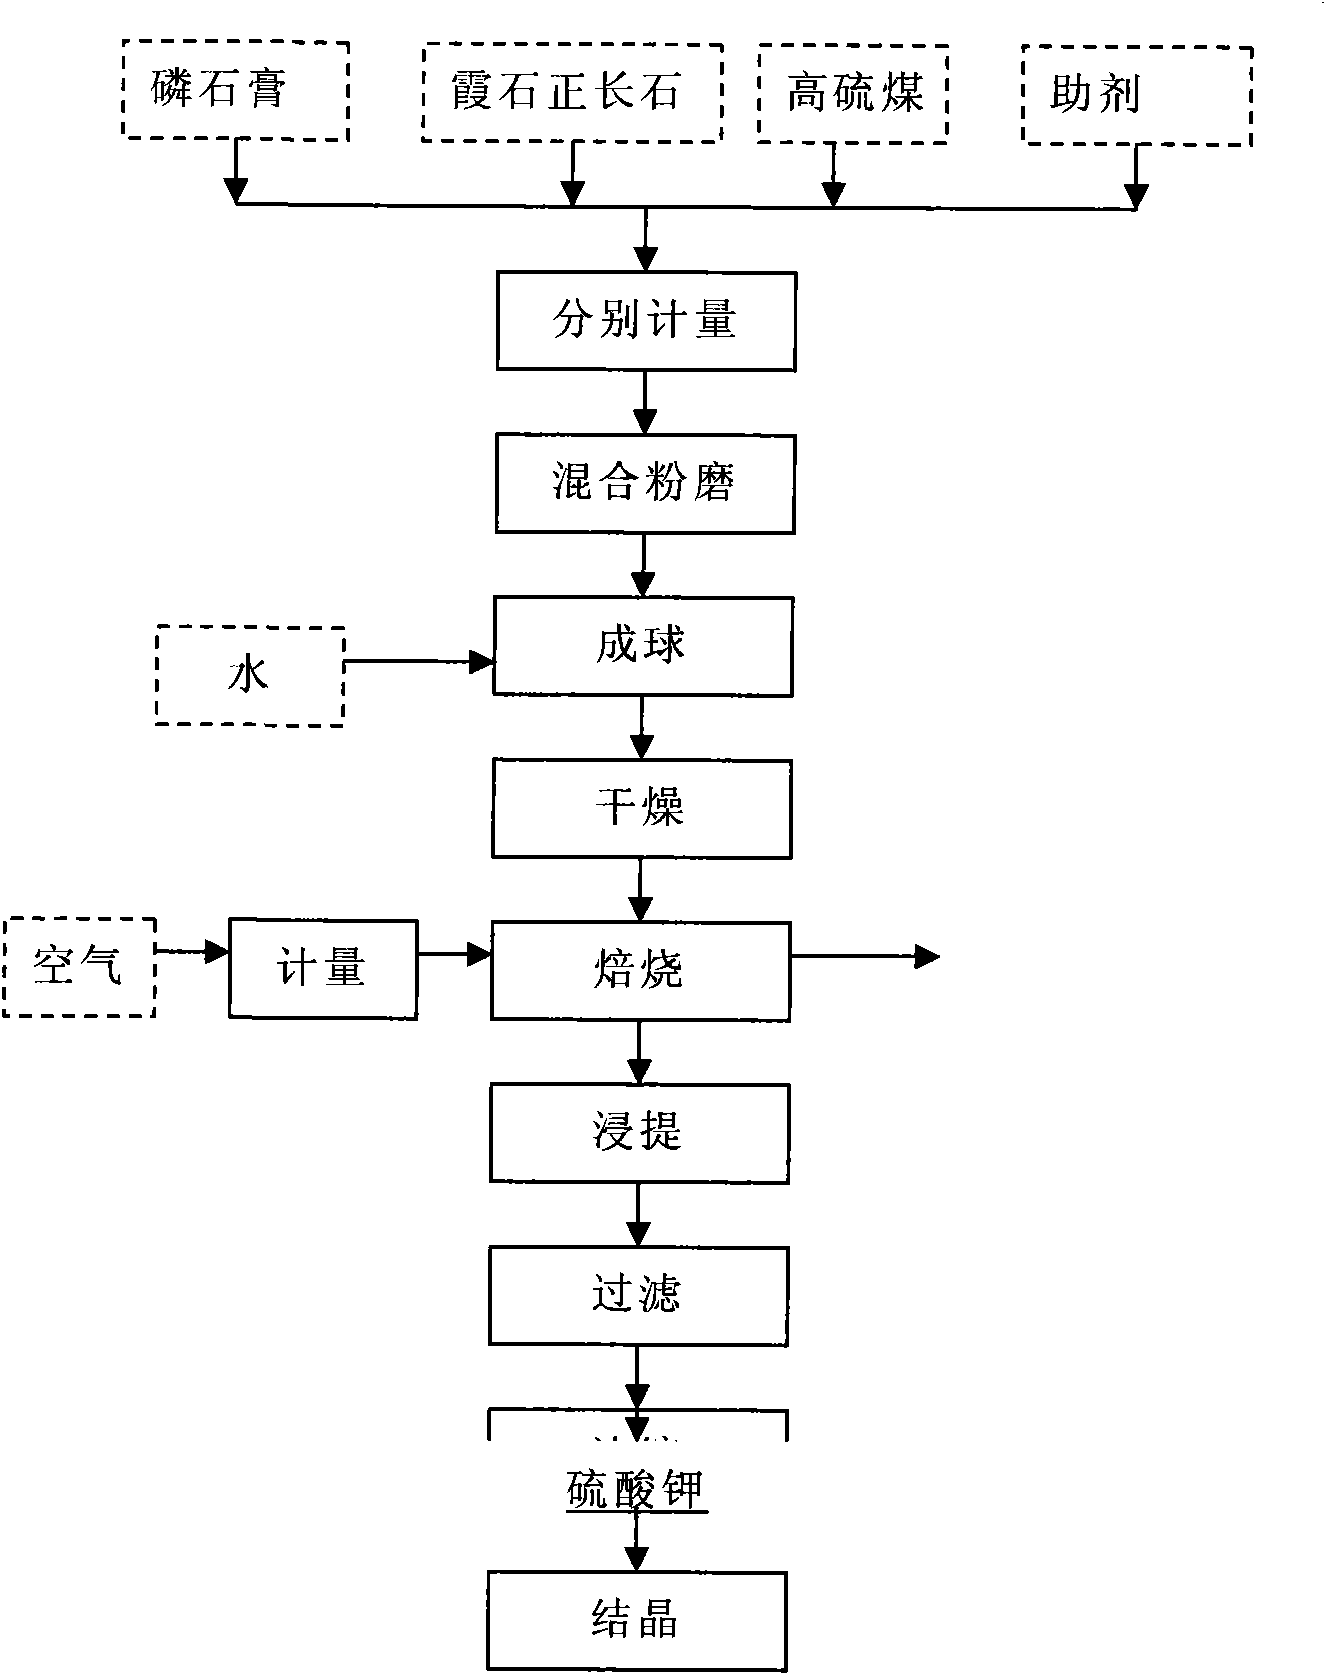 Preparation method for preparing potash fertilizer and producing sulfuric acid simultaneously employing mineral with potassium, ardealite and high-sulphur coal